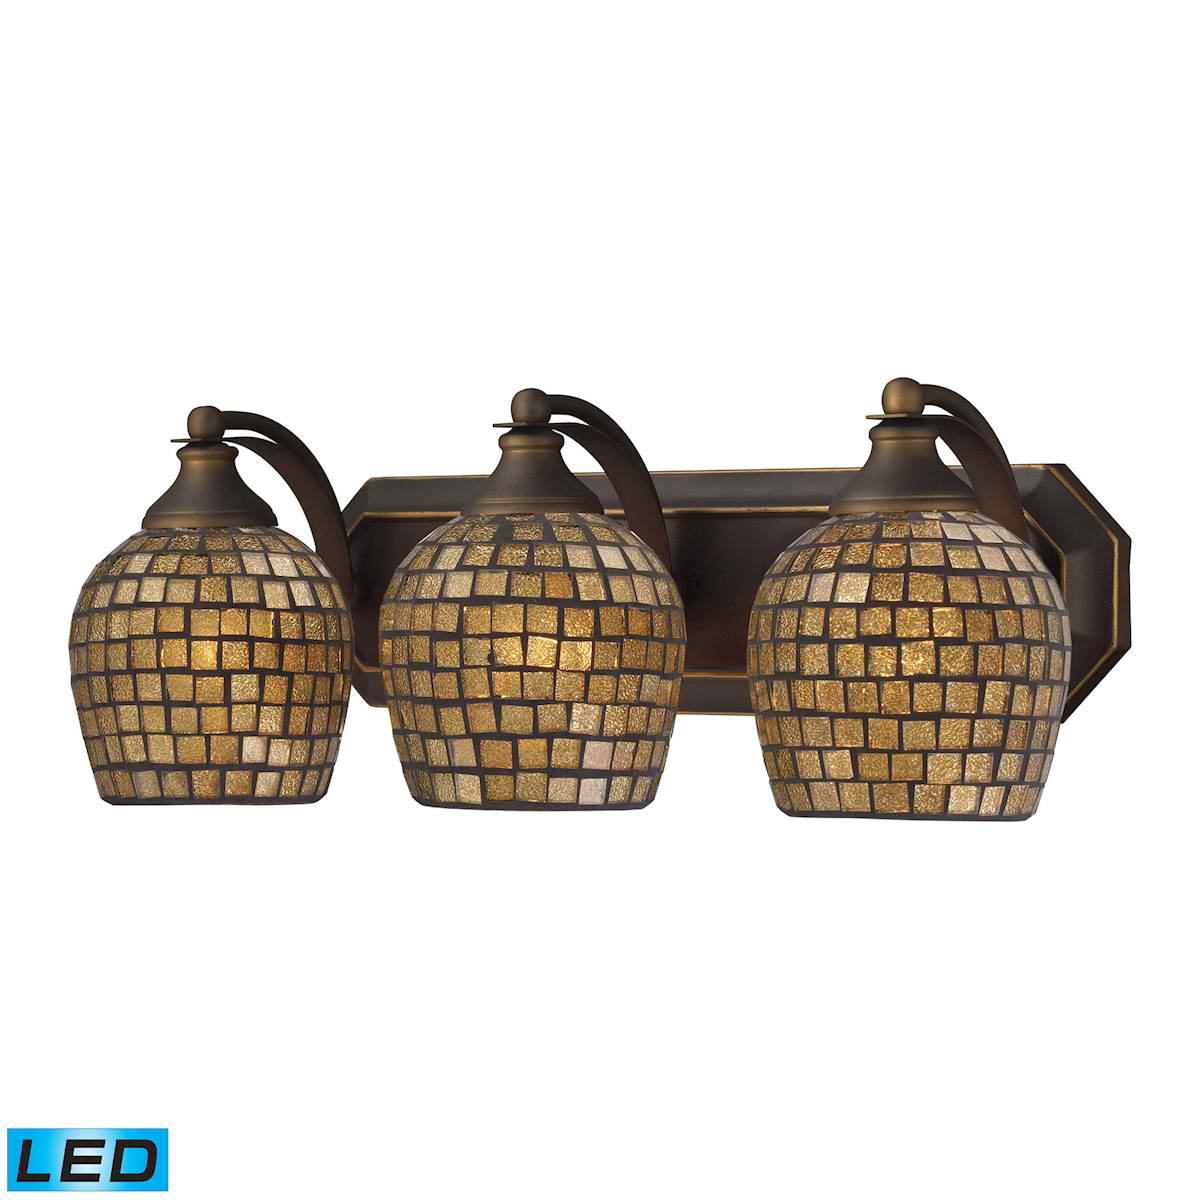 3 Light Vanity in Aged Bronze and Gold Mosaic Glass - LED, 800 Lumens (2400 Lumens Total) with Full Scale